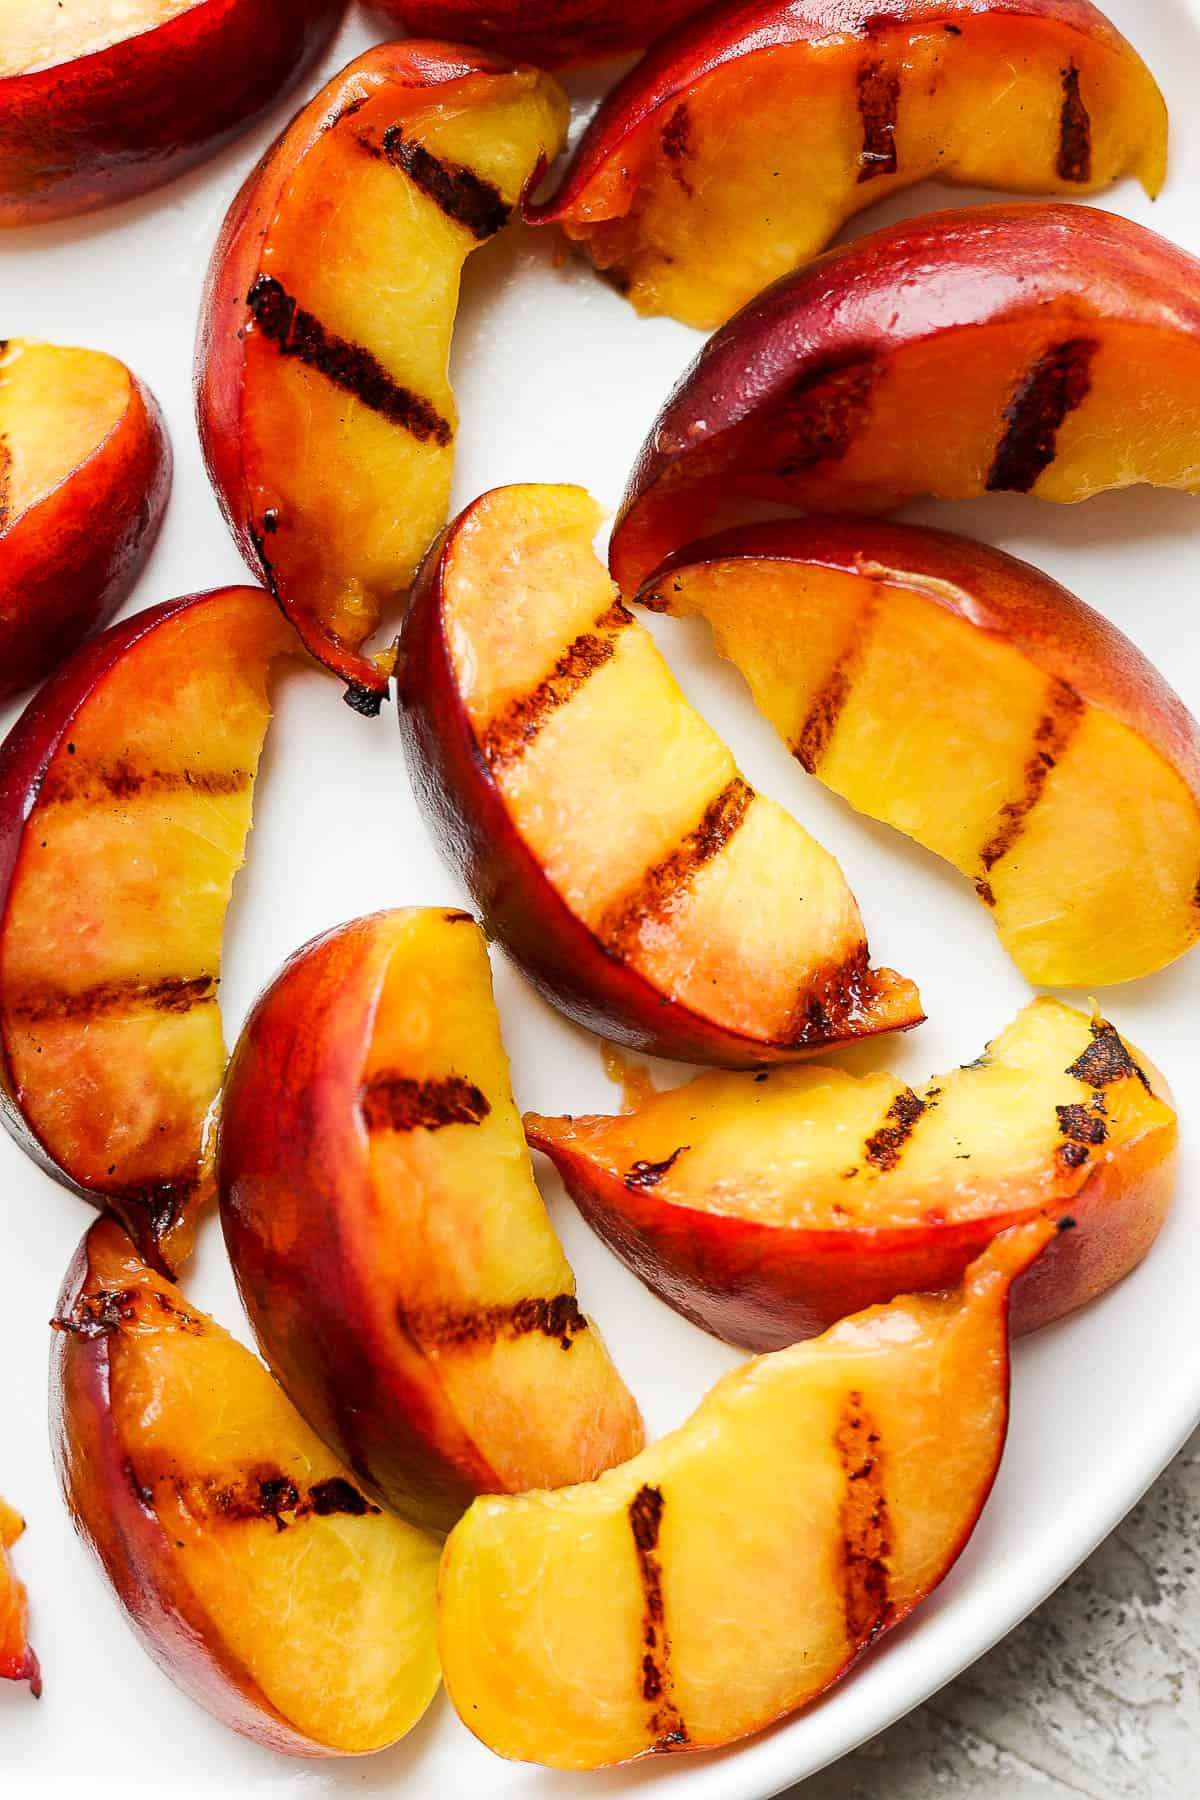 Grilled Peach wedges on a plate.